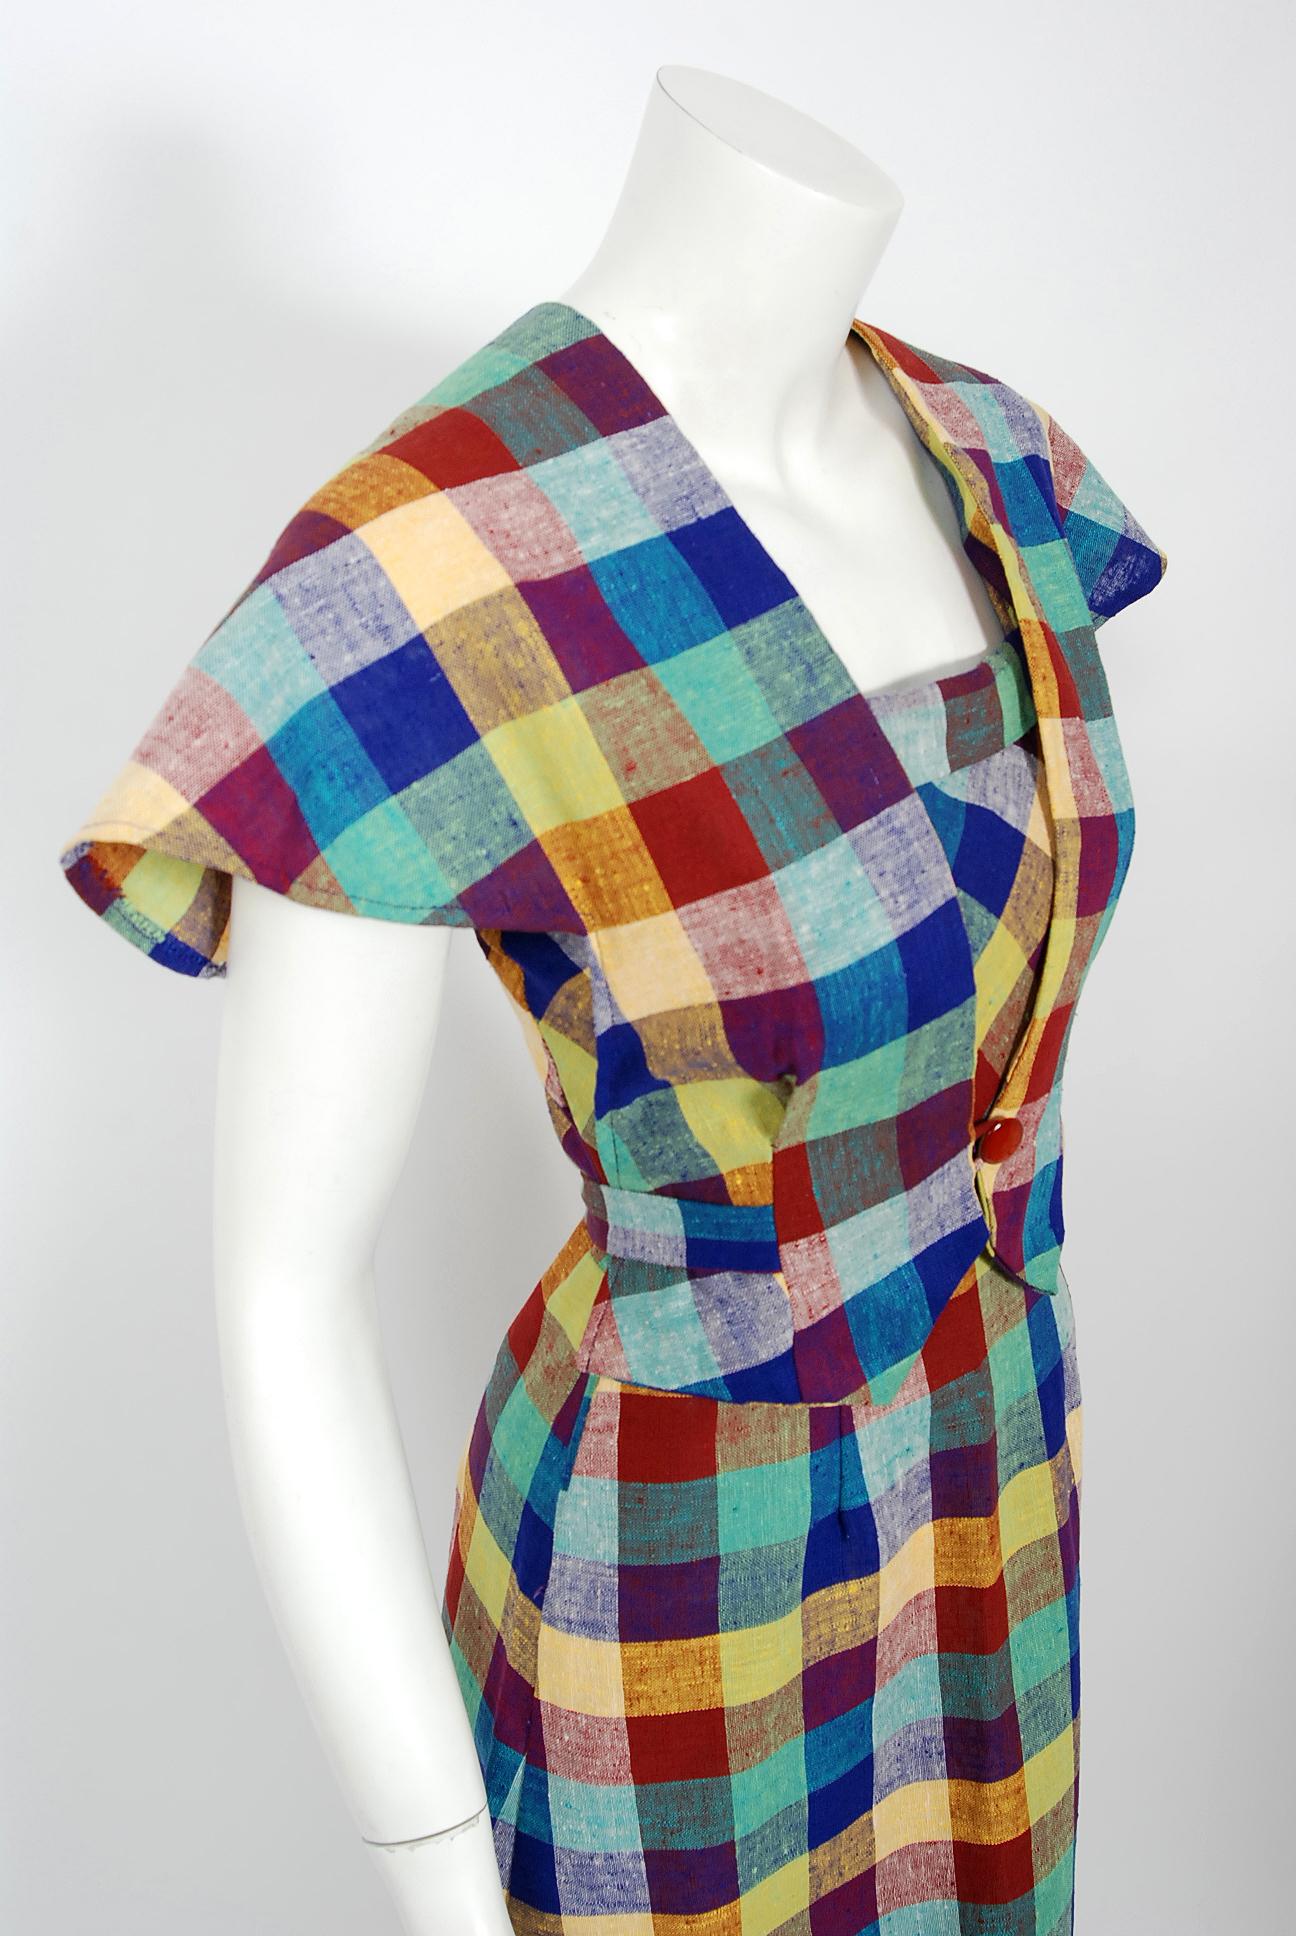 With its vibrant linen-cotton plaid and flawless styling, this Gay Gibson designer dress ensemble has the casual elegance the 1940's were known for. The tri-strap bodice with side buttons is very flattering and effortless to wear. The hourglass